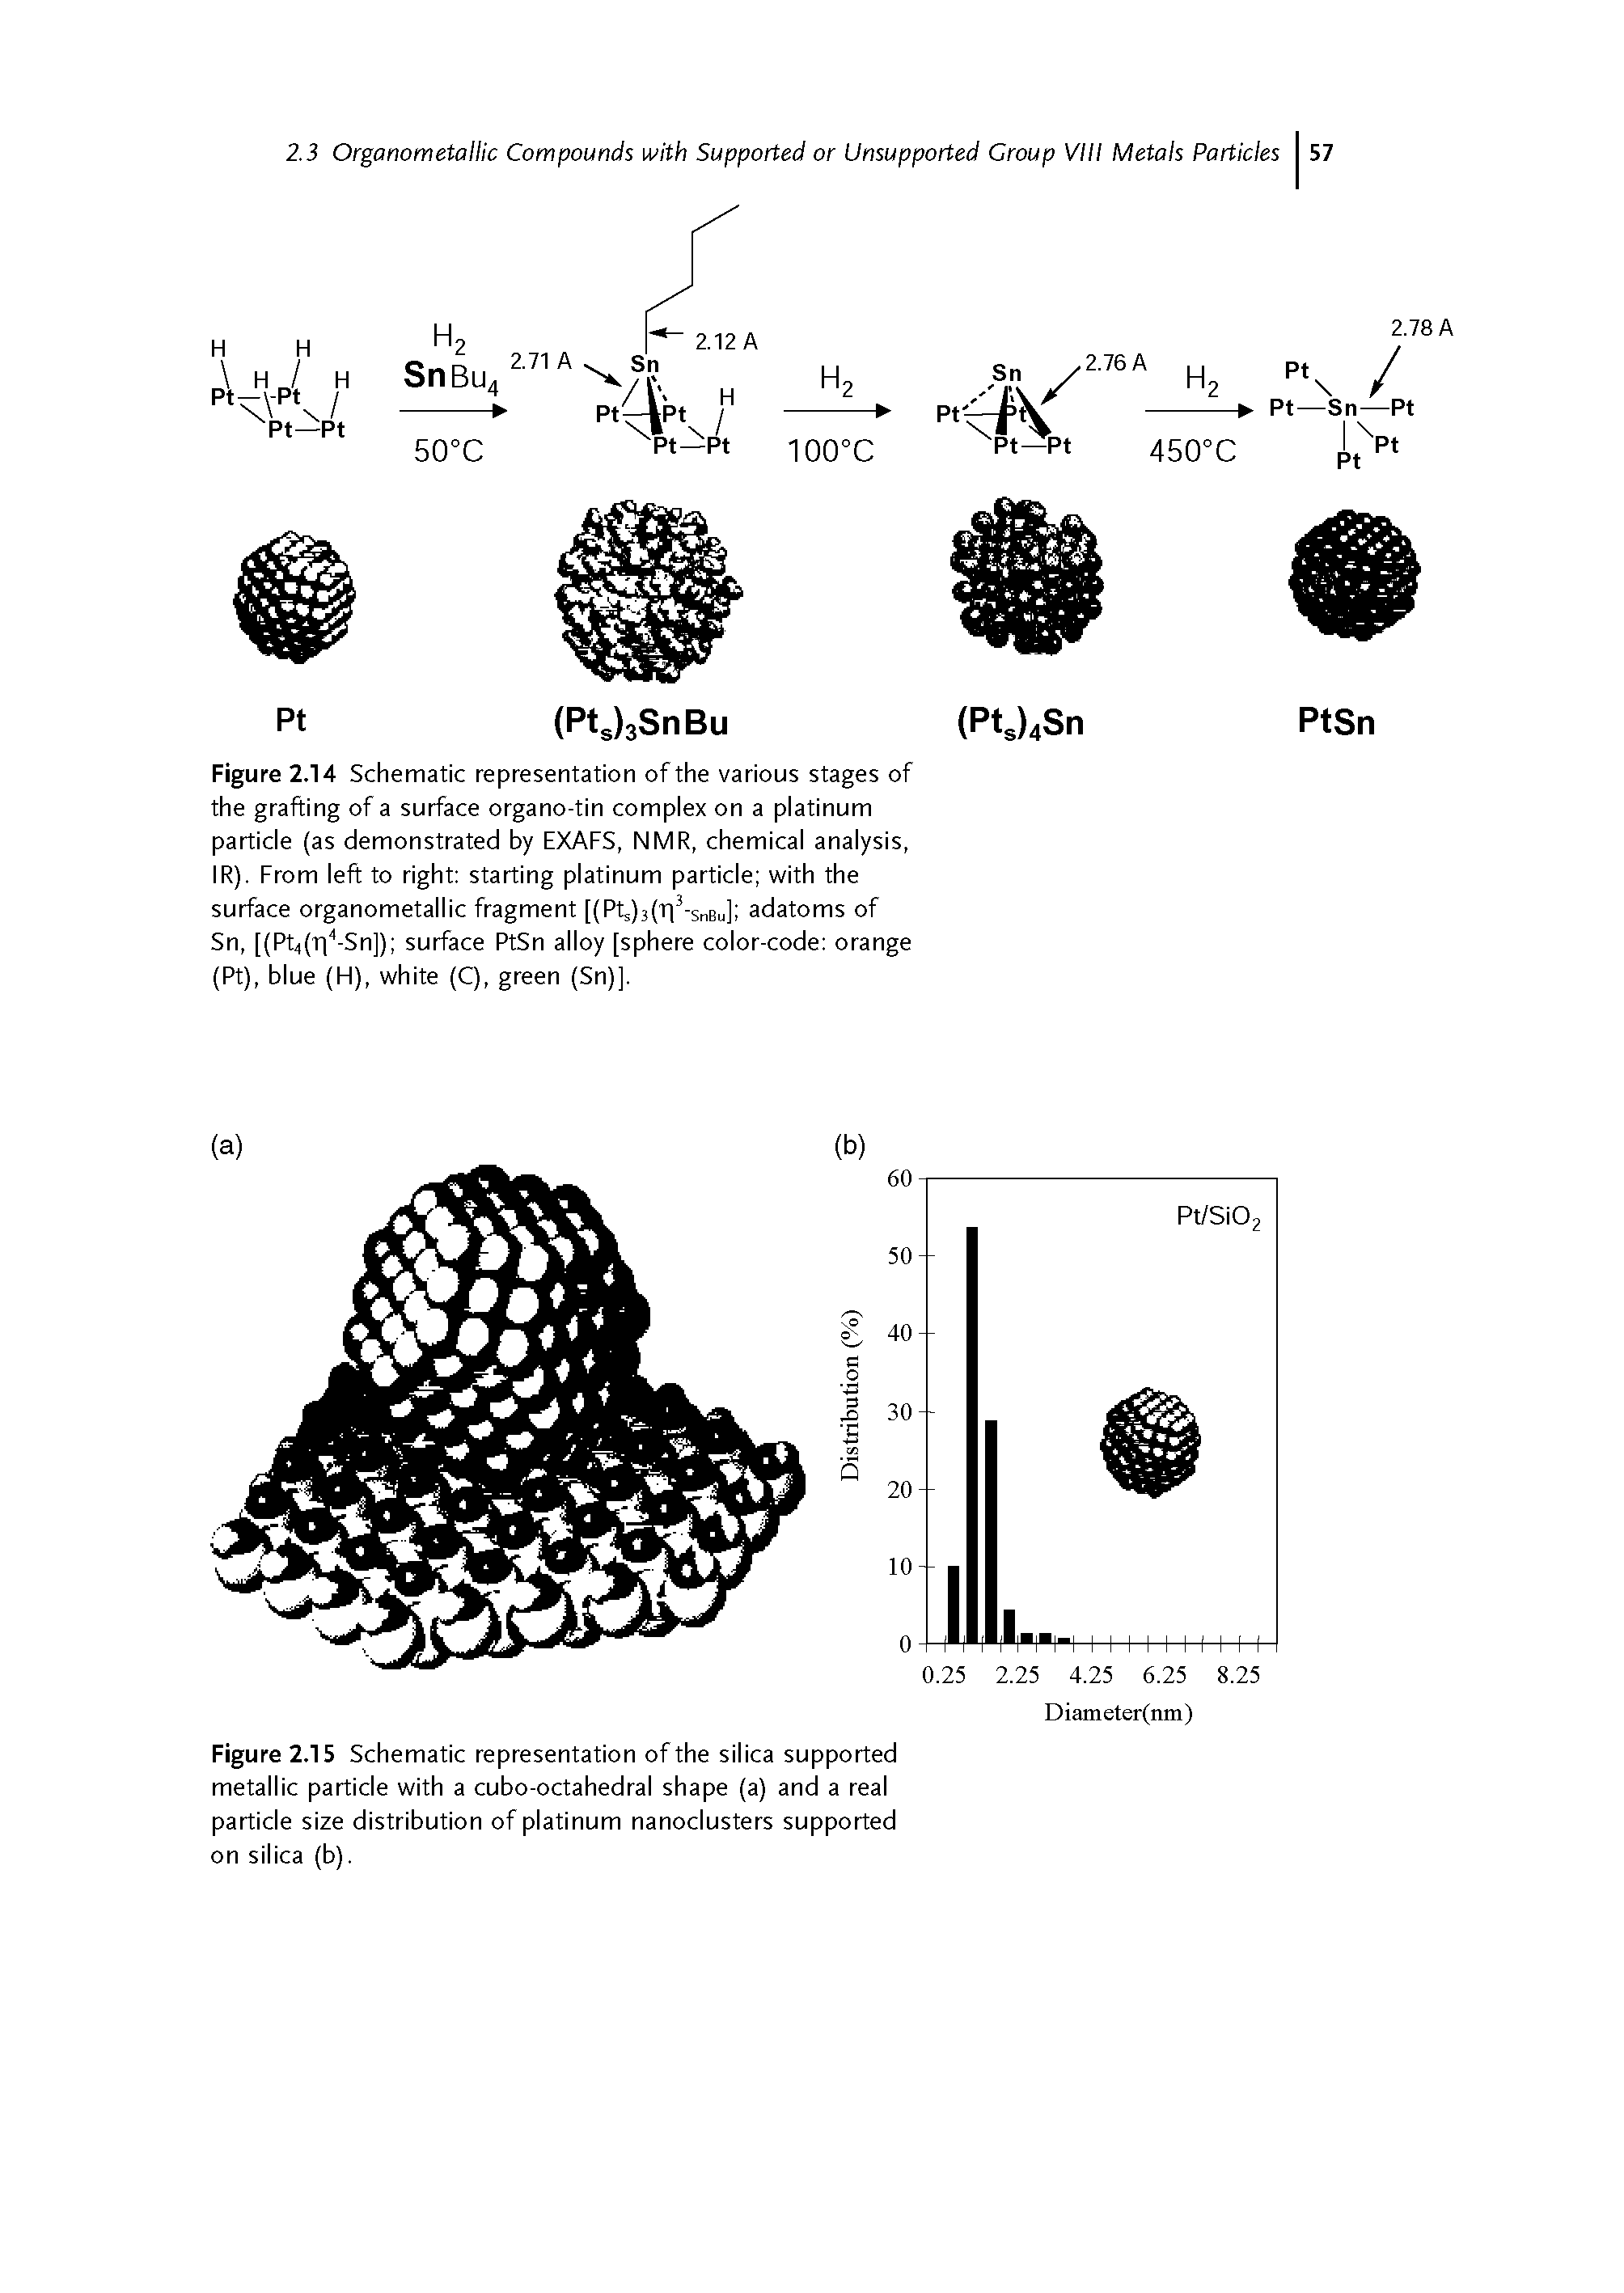 Figure 2.15 Schematic representation of the silica supported metallic particle with a cubo-octahedral shape (a) and a real particle size distribution of platinum nanoclusters supported on silica (b).